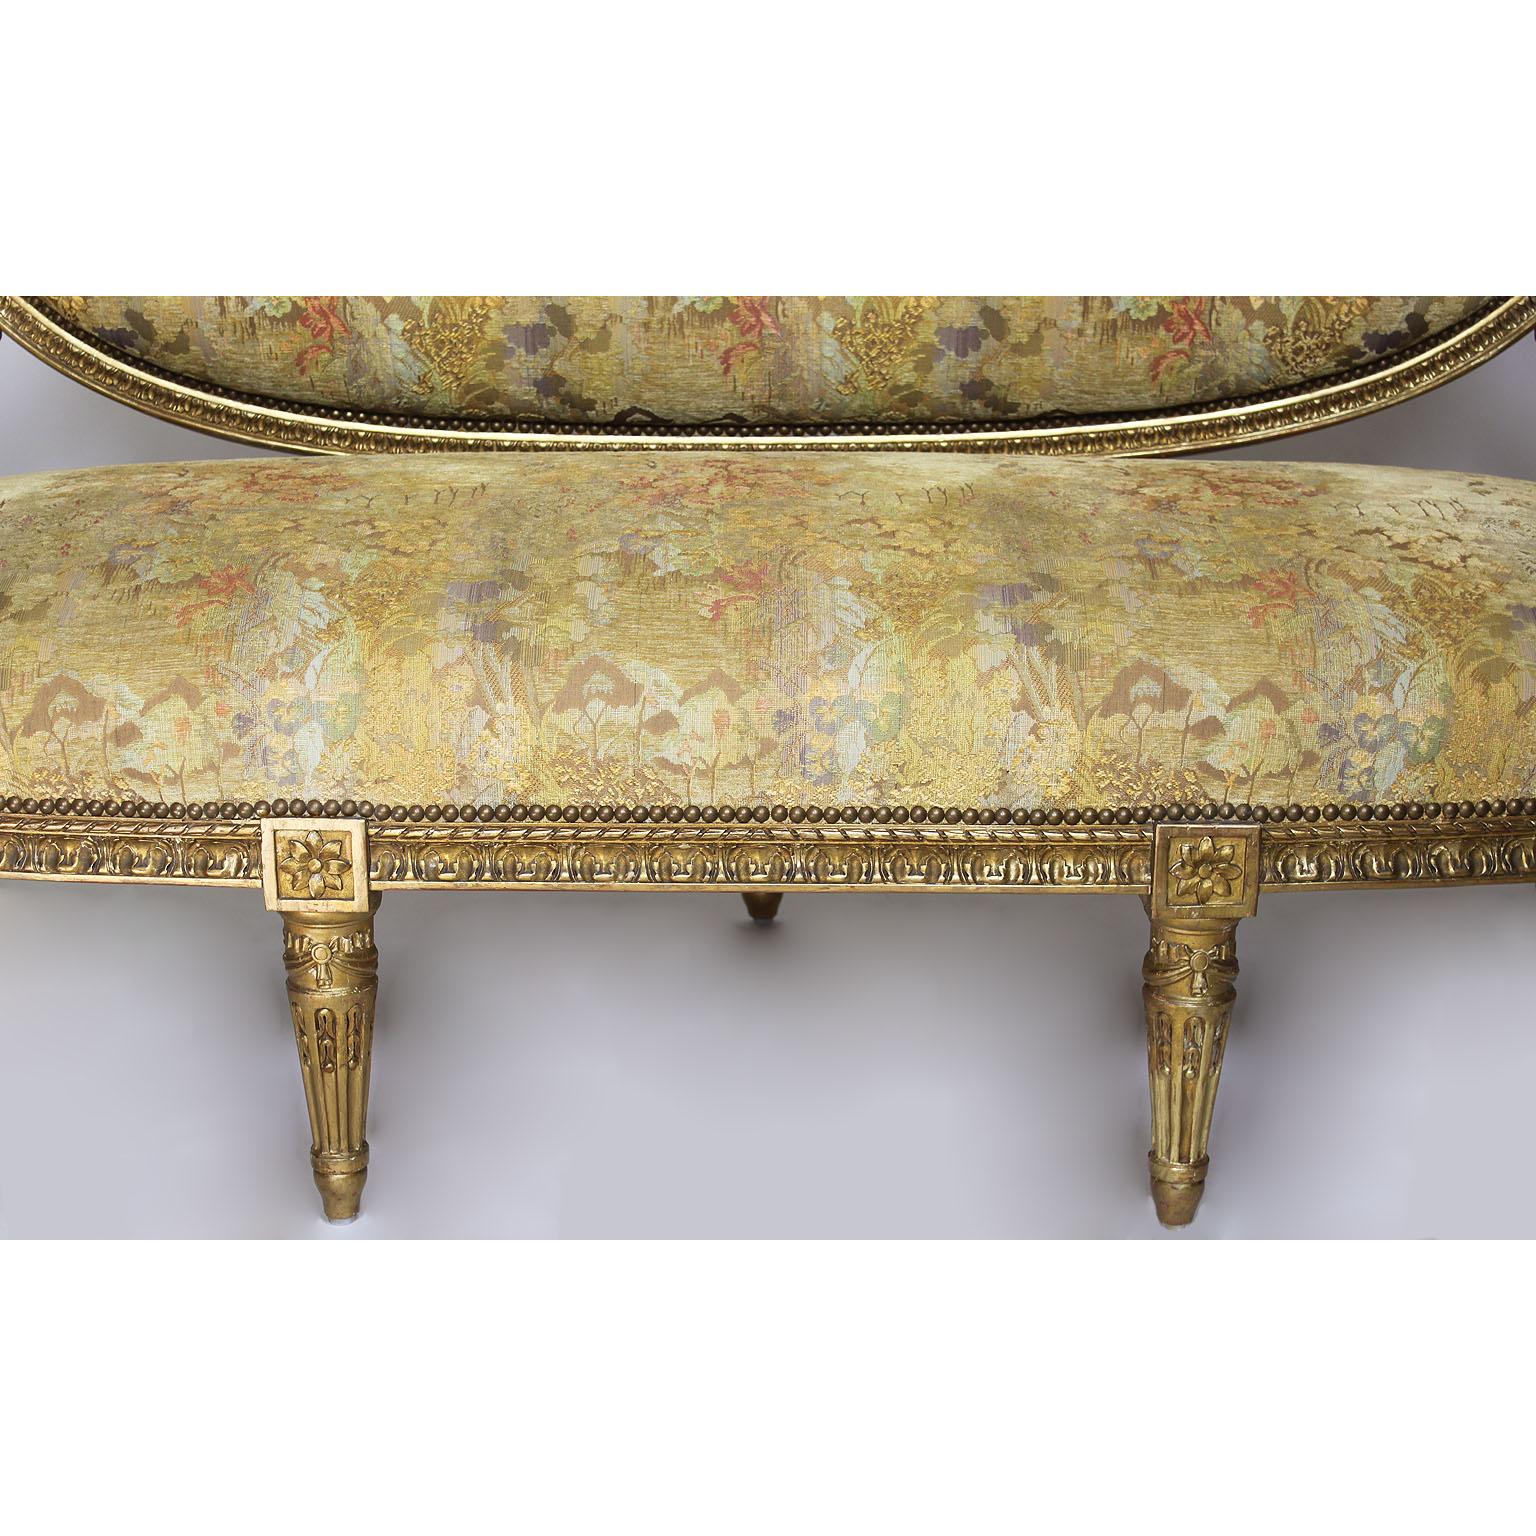 Fine French 19th Century Louis XVI Style Giltwood Carved Five-Piece Salon Suite For Sale 1